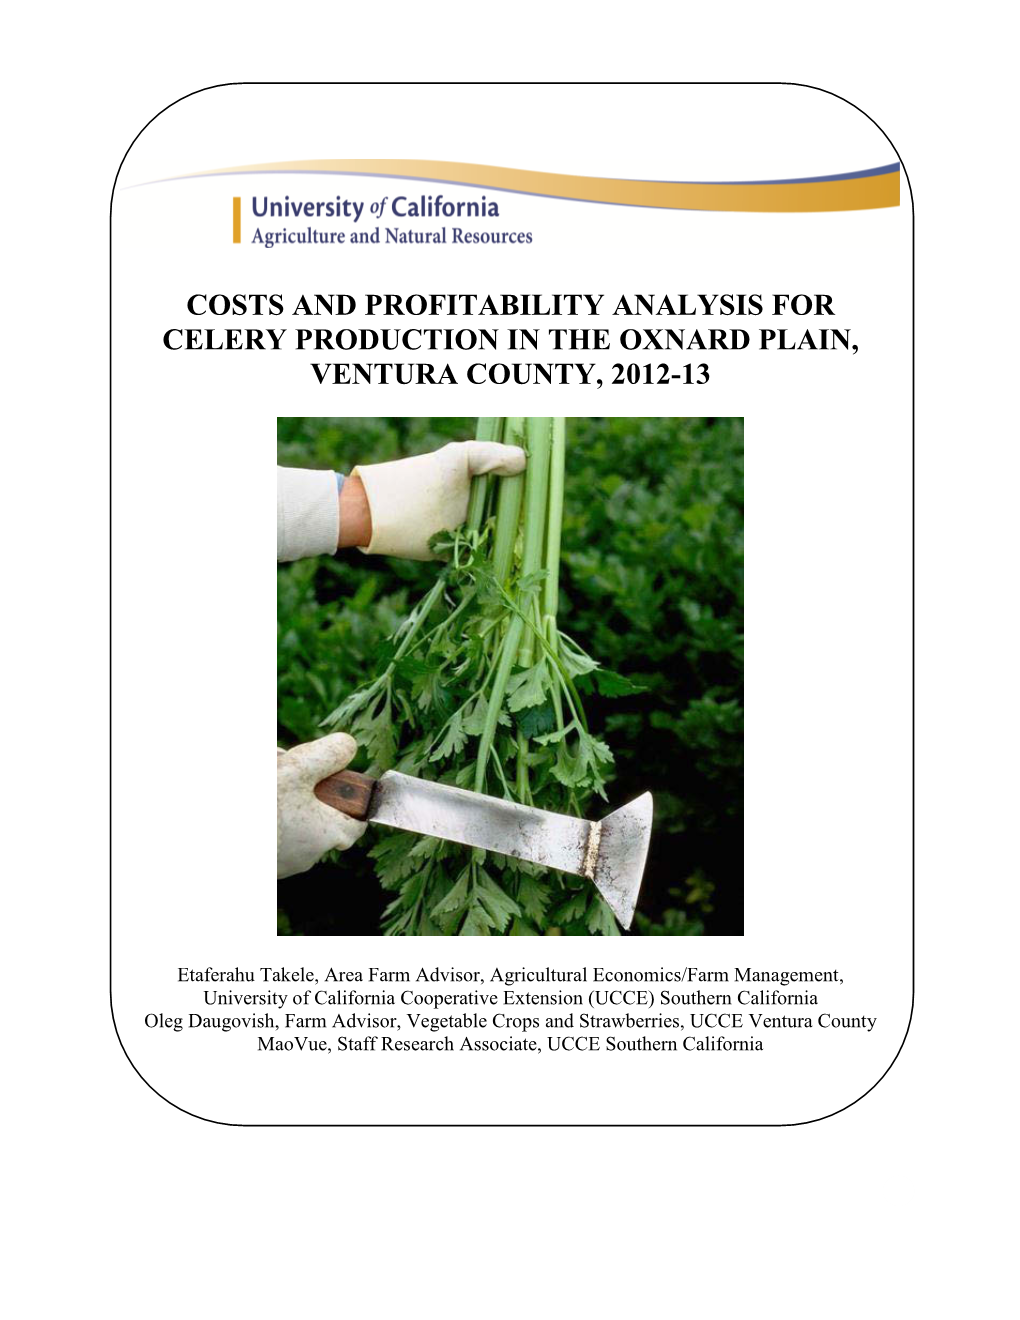 Costs and Profitability Analysis for Celery Production in the Oxnard Plain, Ventura County, 2012-13